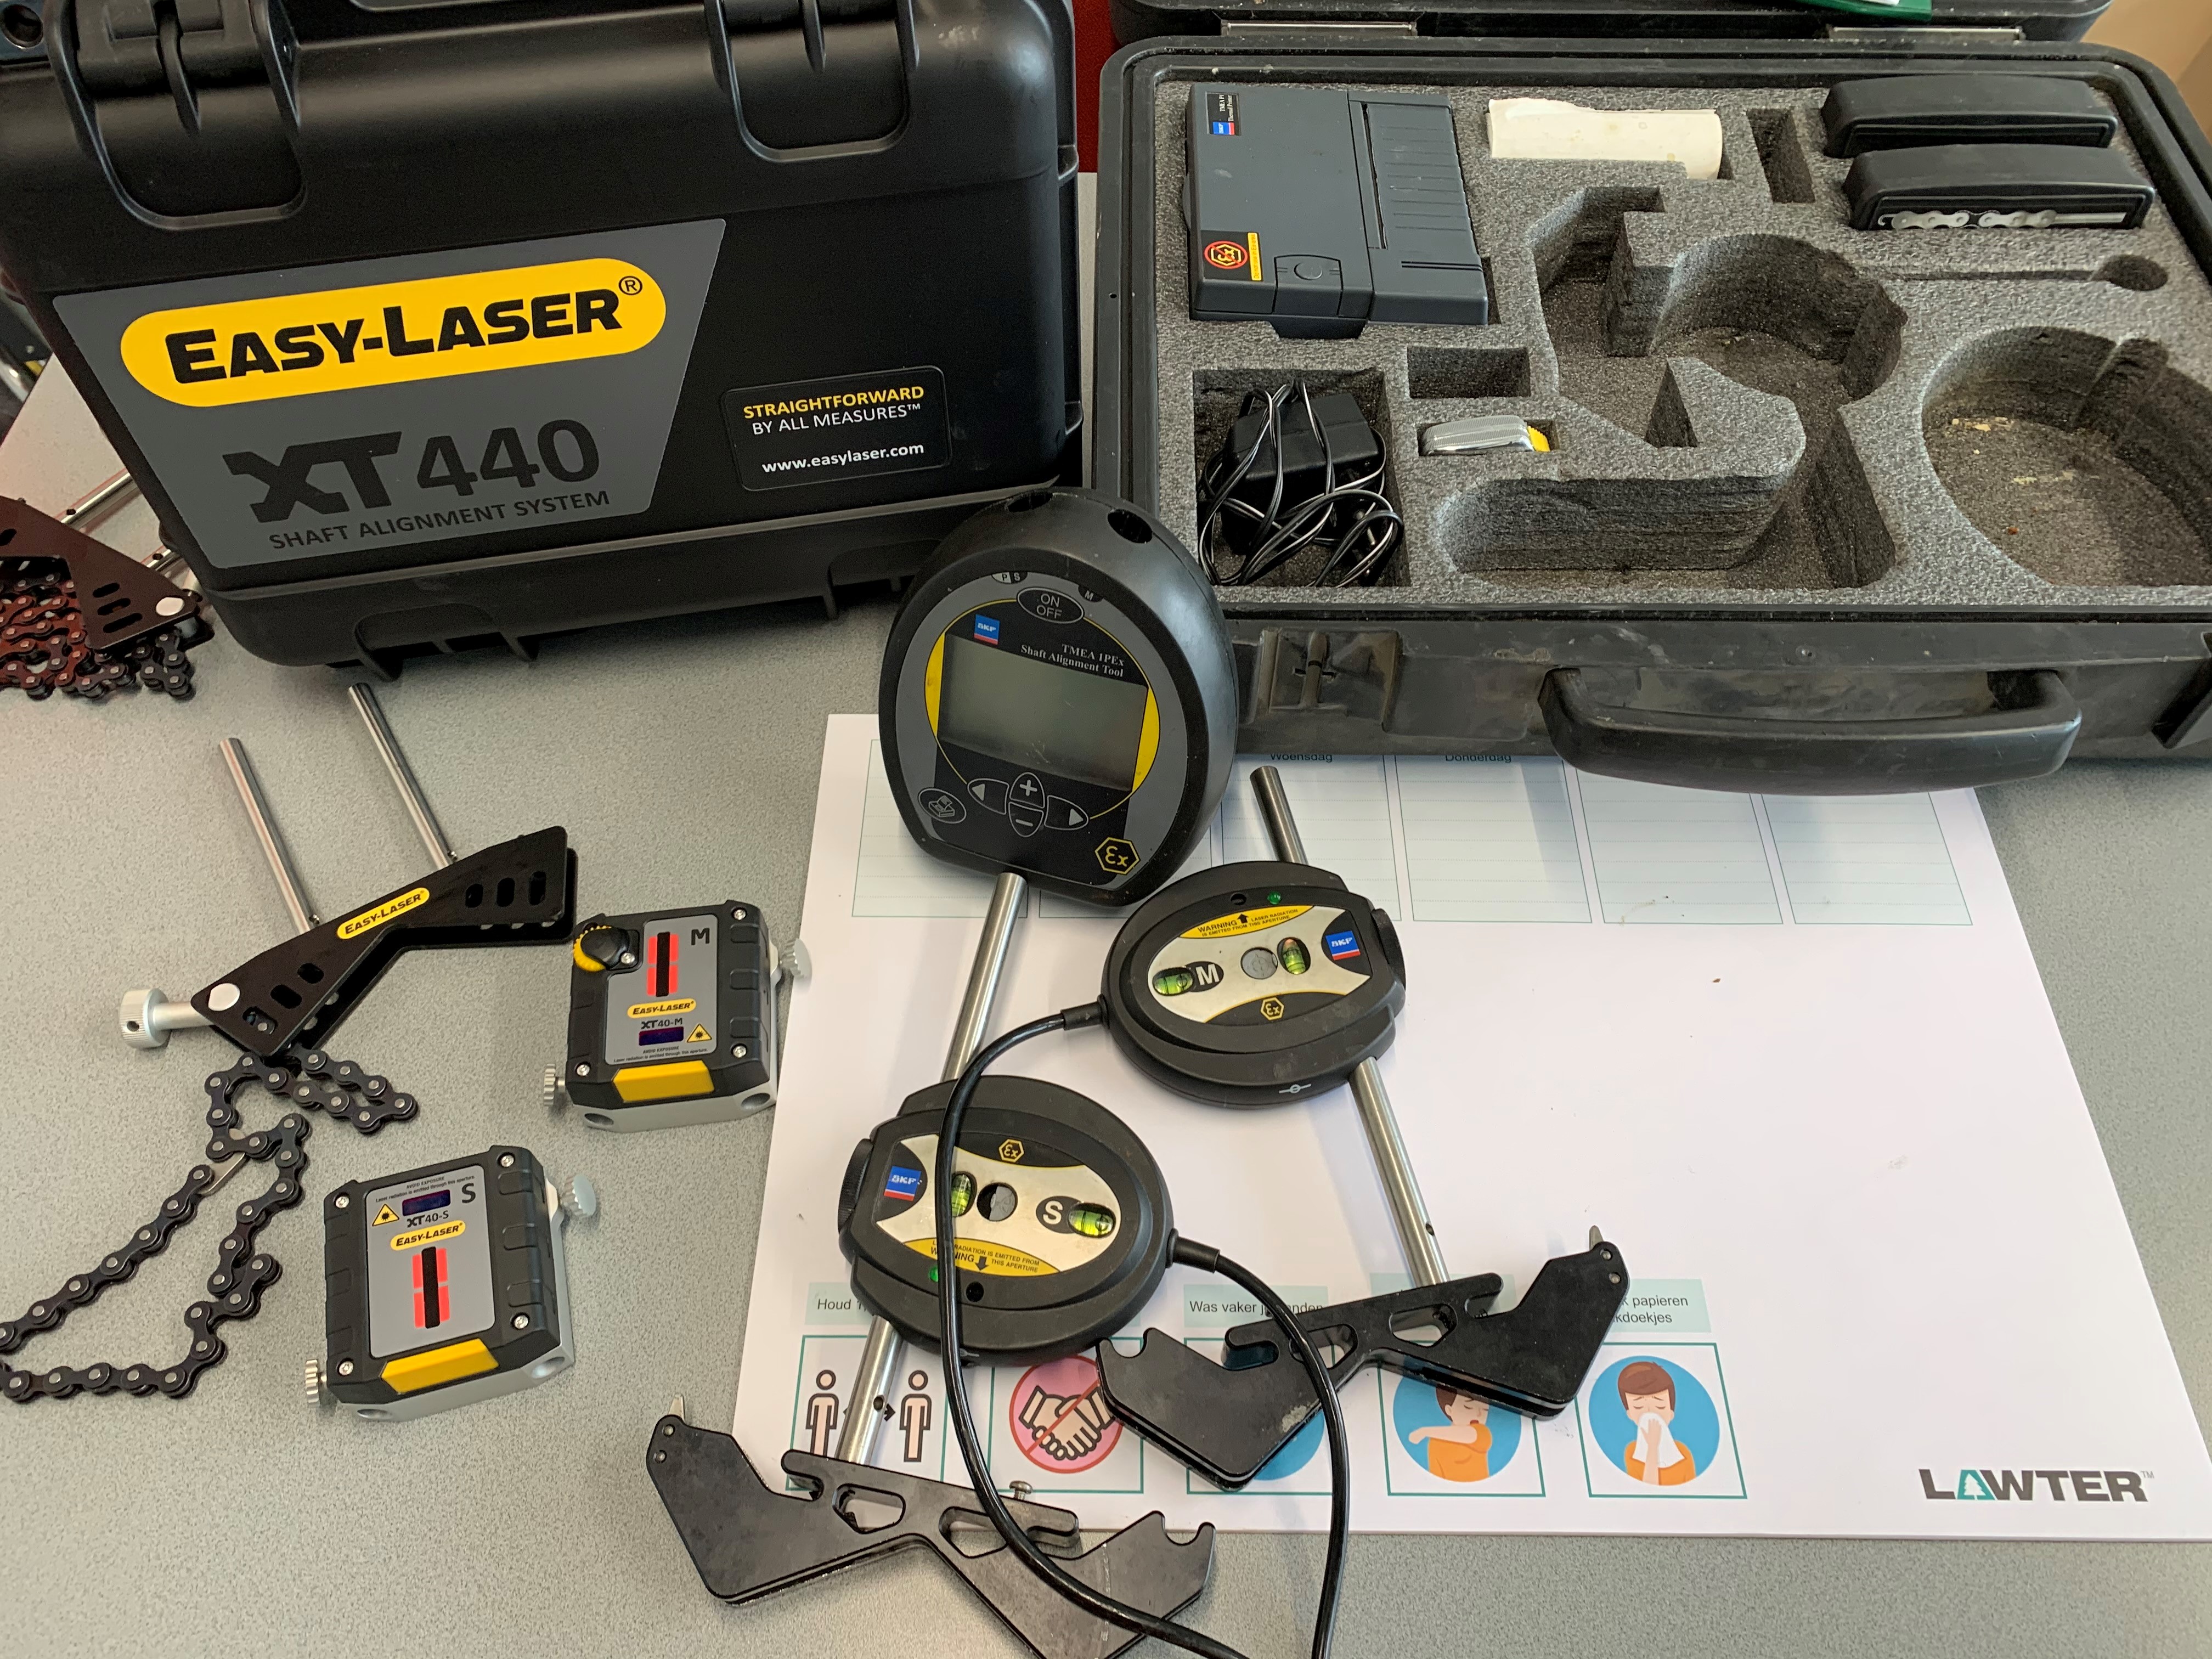 dominio Empuje operación Lawter chooses an Easy-Laser as their new shaft alignment system - SPM  Instrument